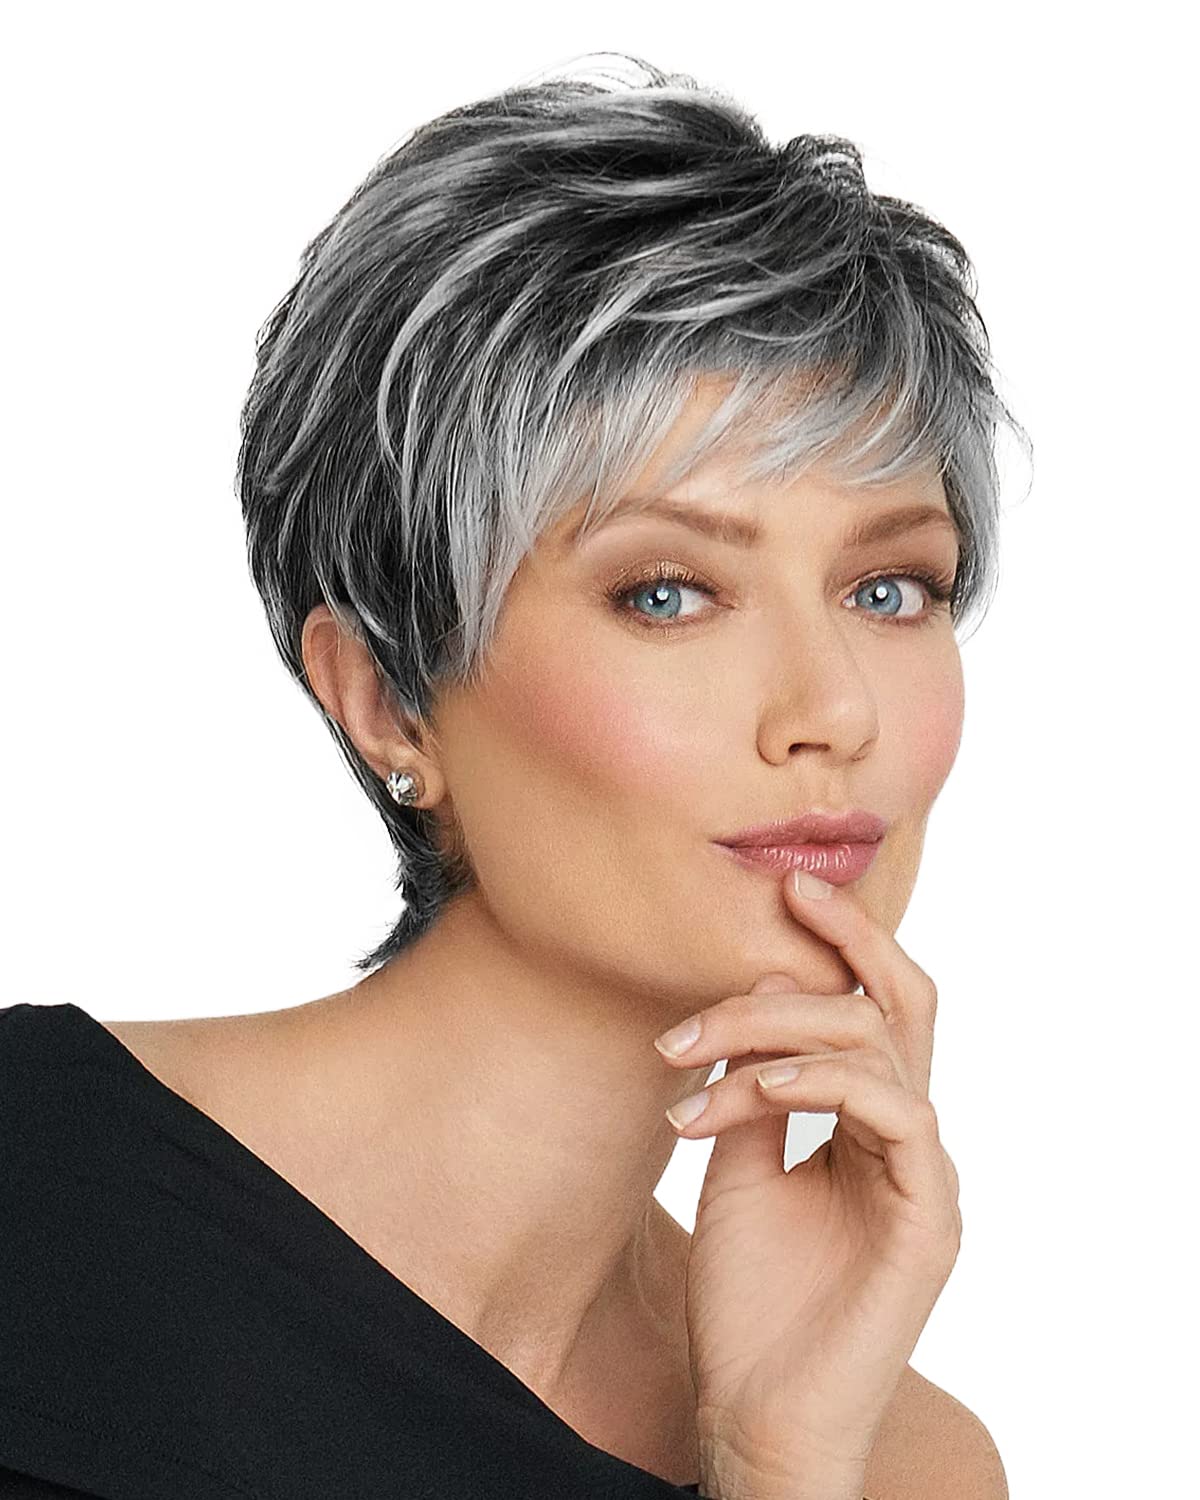 REECHO Pixie Cut Wigs for White Women, Short Wigs with Bangs layered hairstyles for Unisex Adult